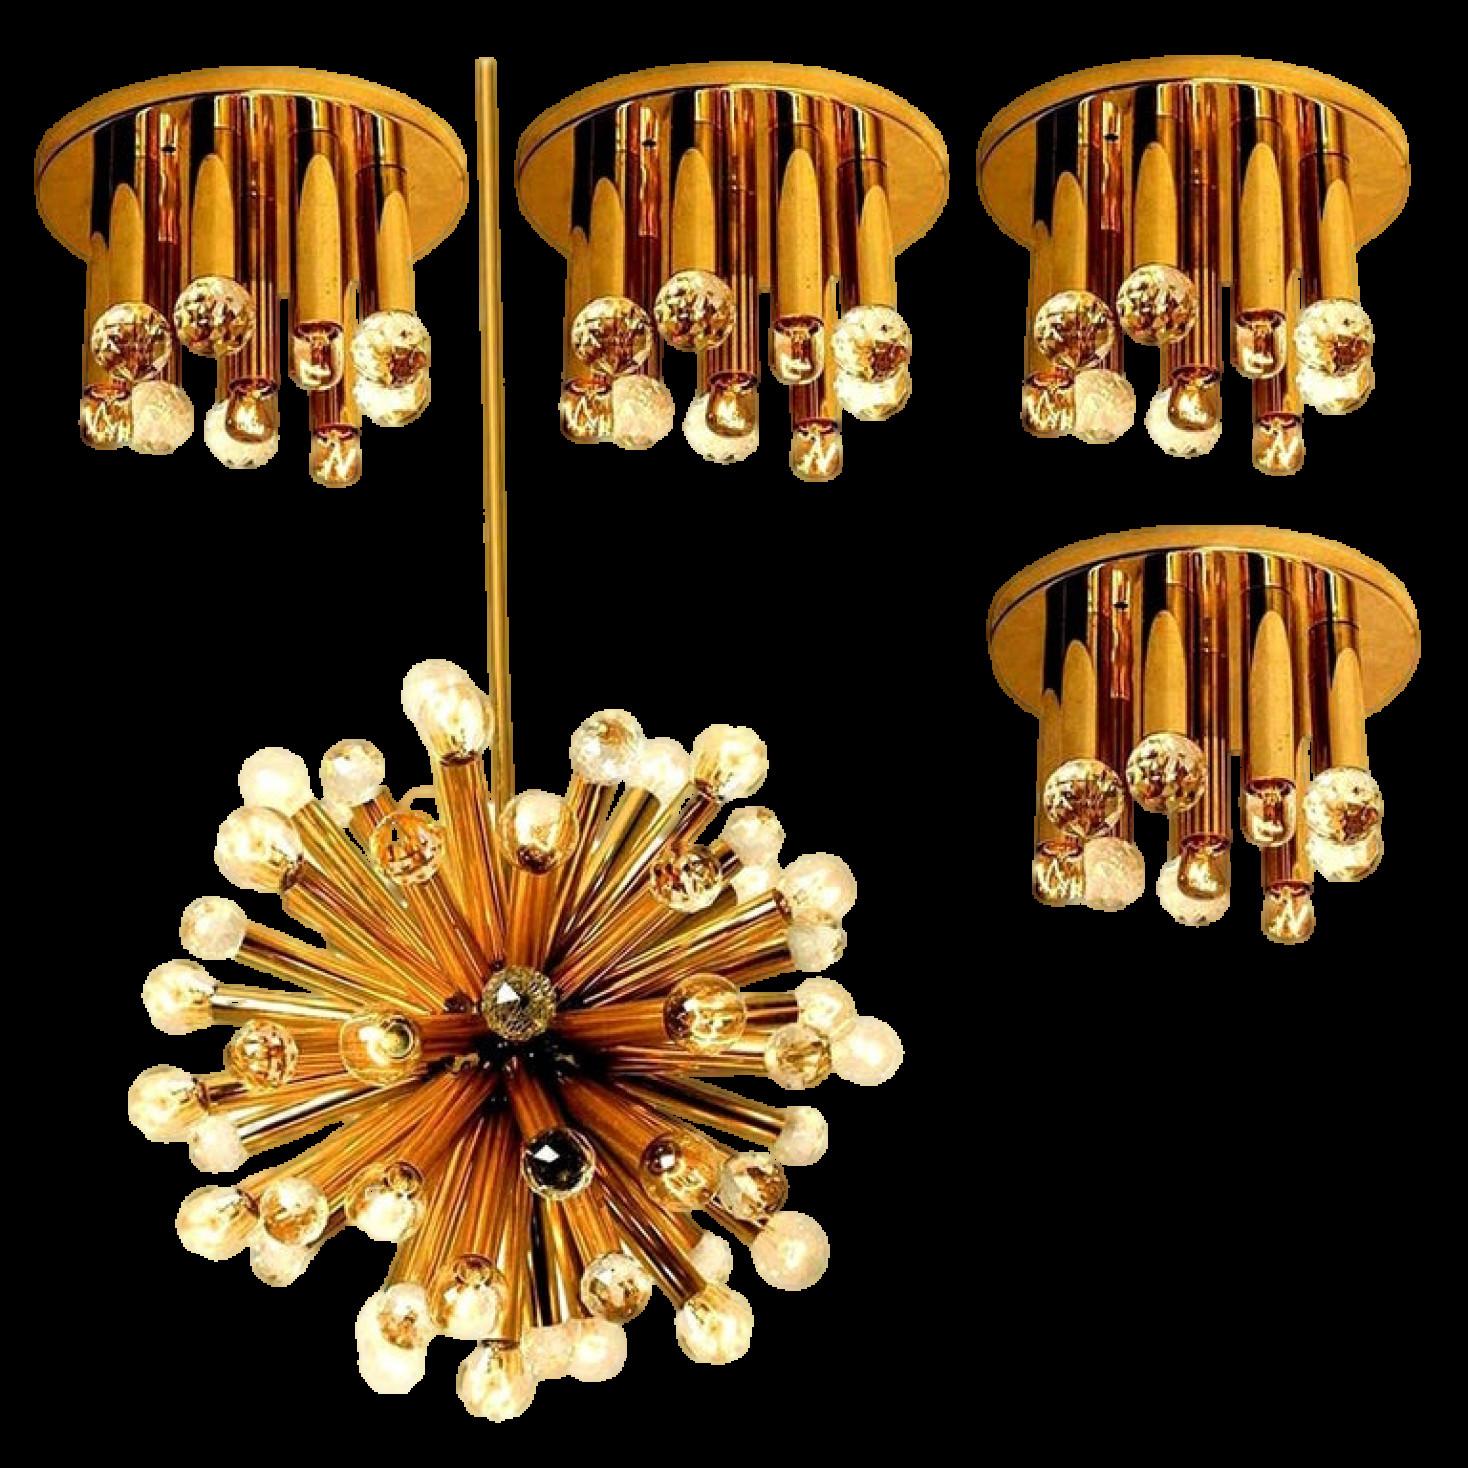 This high quality set was manufactured by Ernst Palme in German Westheim during the 1960s. The set has gilt brass arms with large Swarovski balls. The handcut lead crystal Swarovski balls reflect multiple colors in the sunlight. The lighting